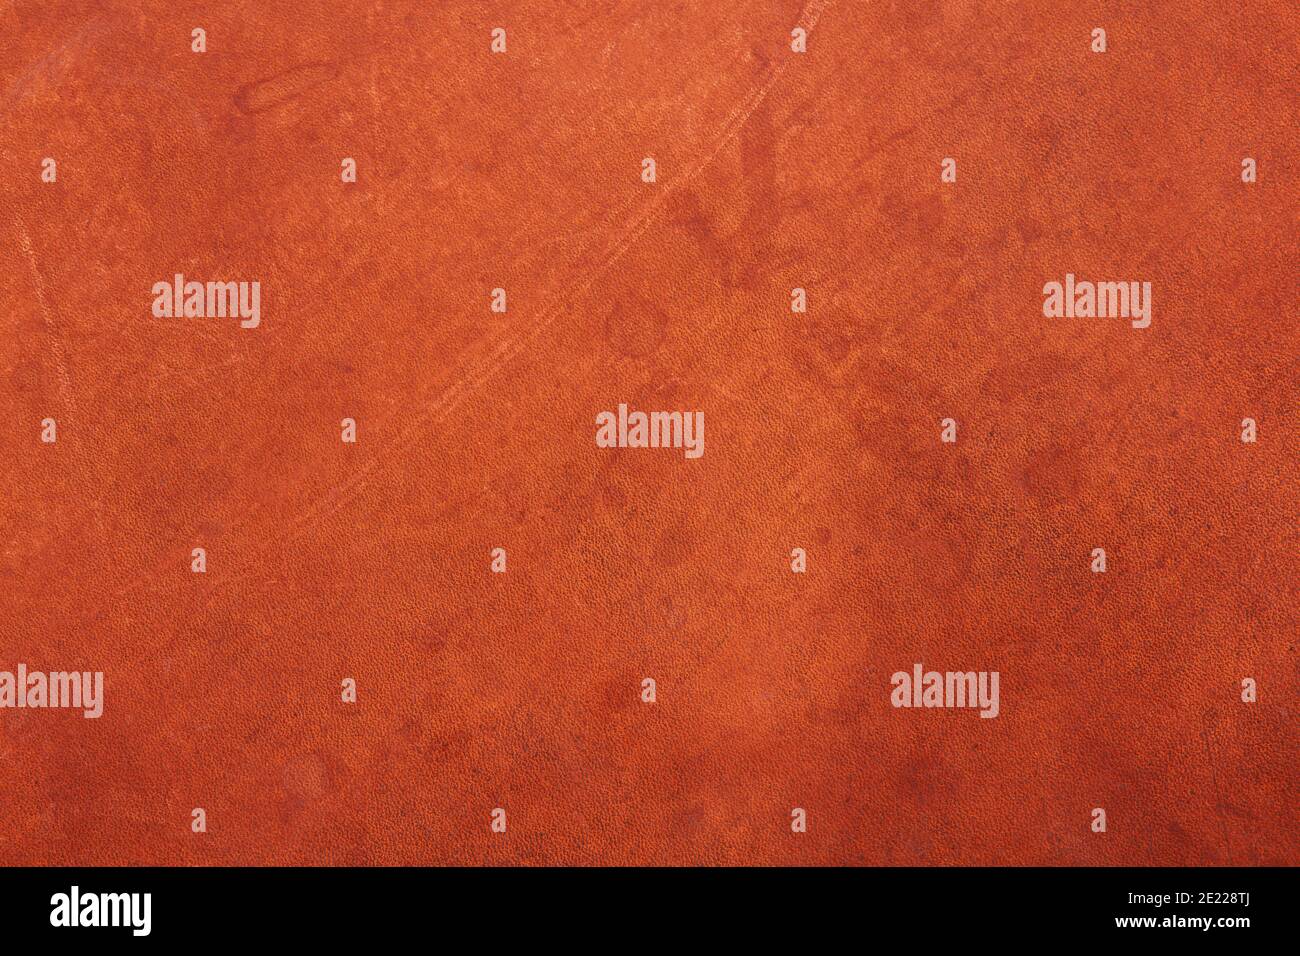 Brown, dirty leather texture background Stock Photo